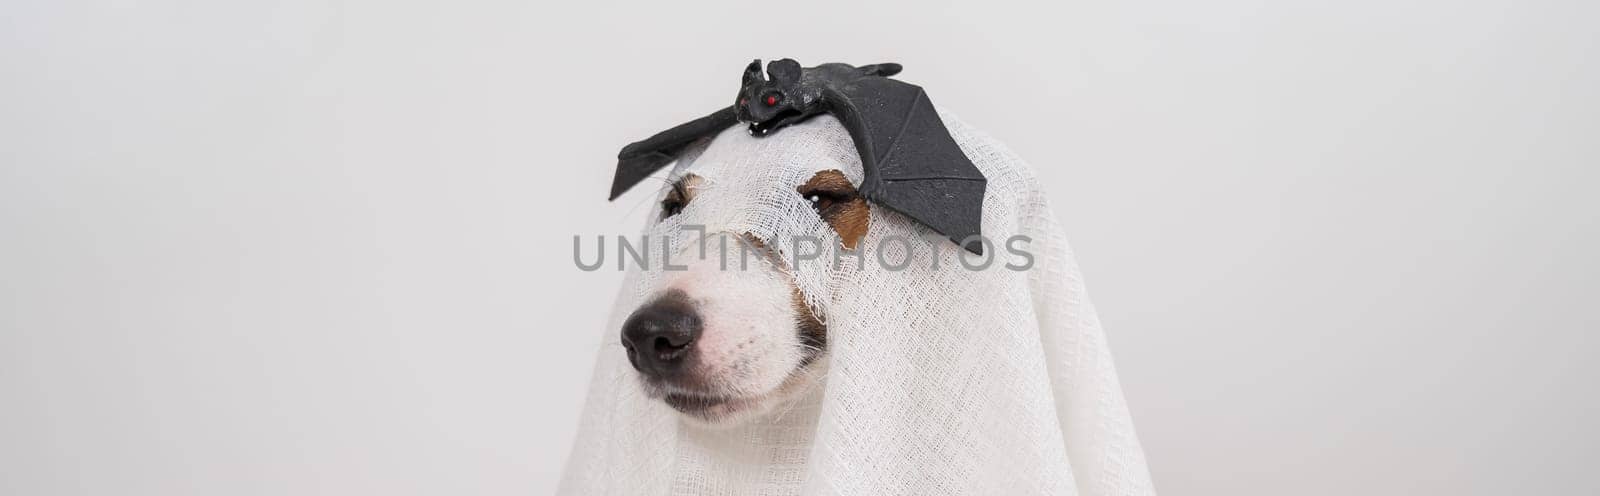 Dog Jack Russell Terrier in a ghost costume with a bat on his head on a white background. Widescreen